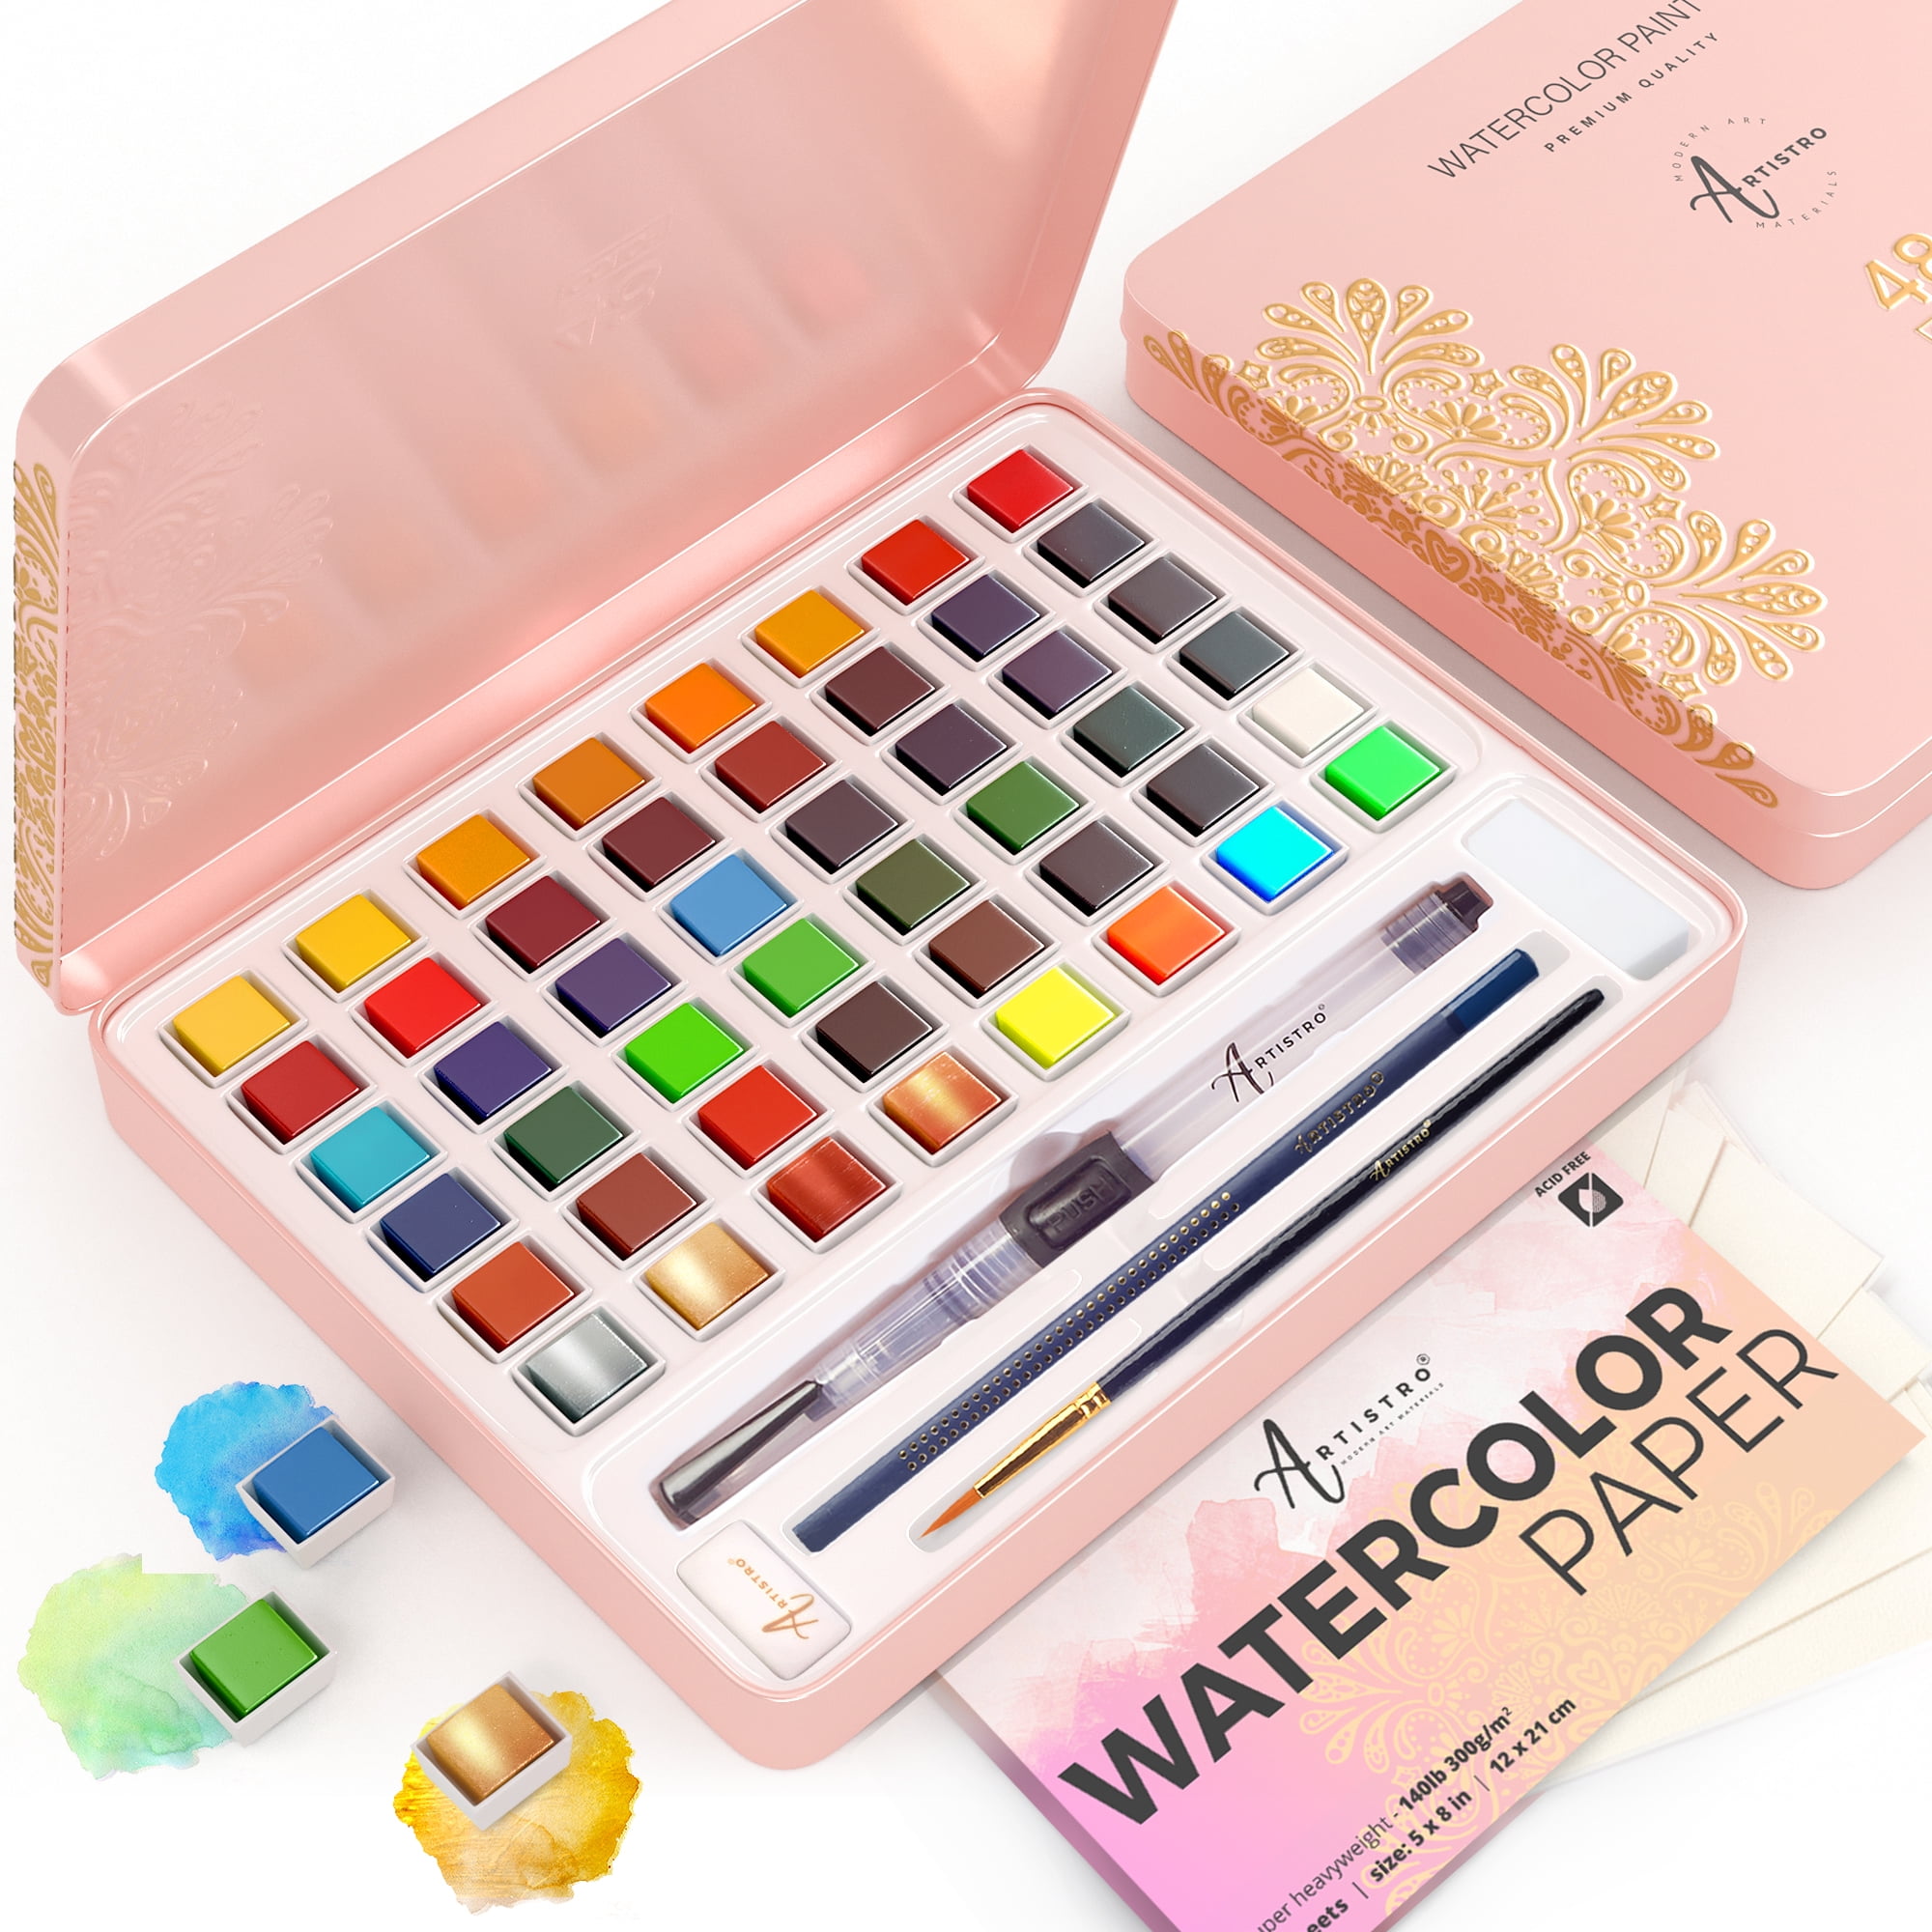 ARTISTRO Watercolor Paint Set, 48 Vivid Colors in Portable Box, Including Metallic and Fluorescent Colors for Artists, Amateur Hobbyists and Painting